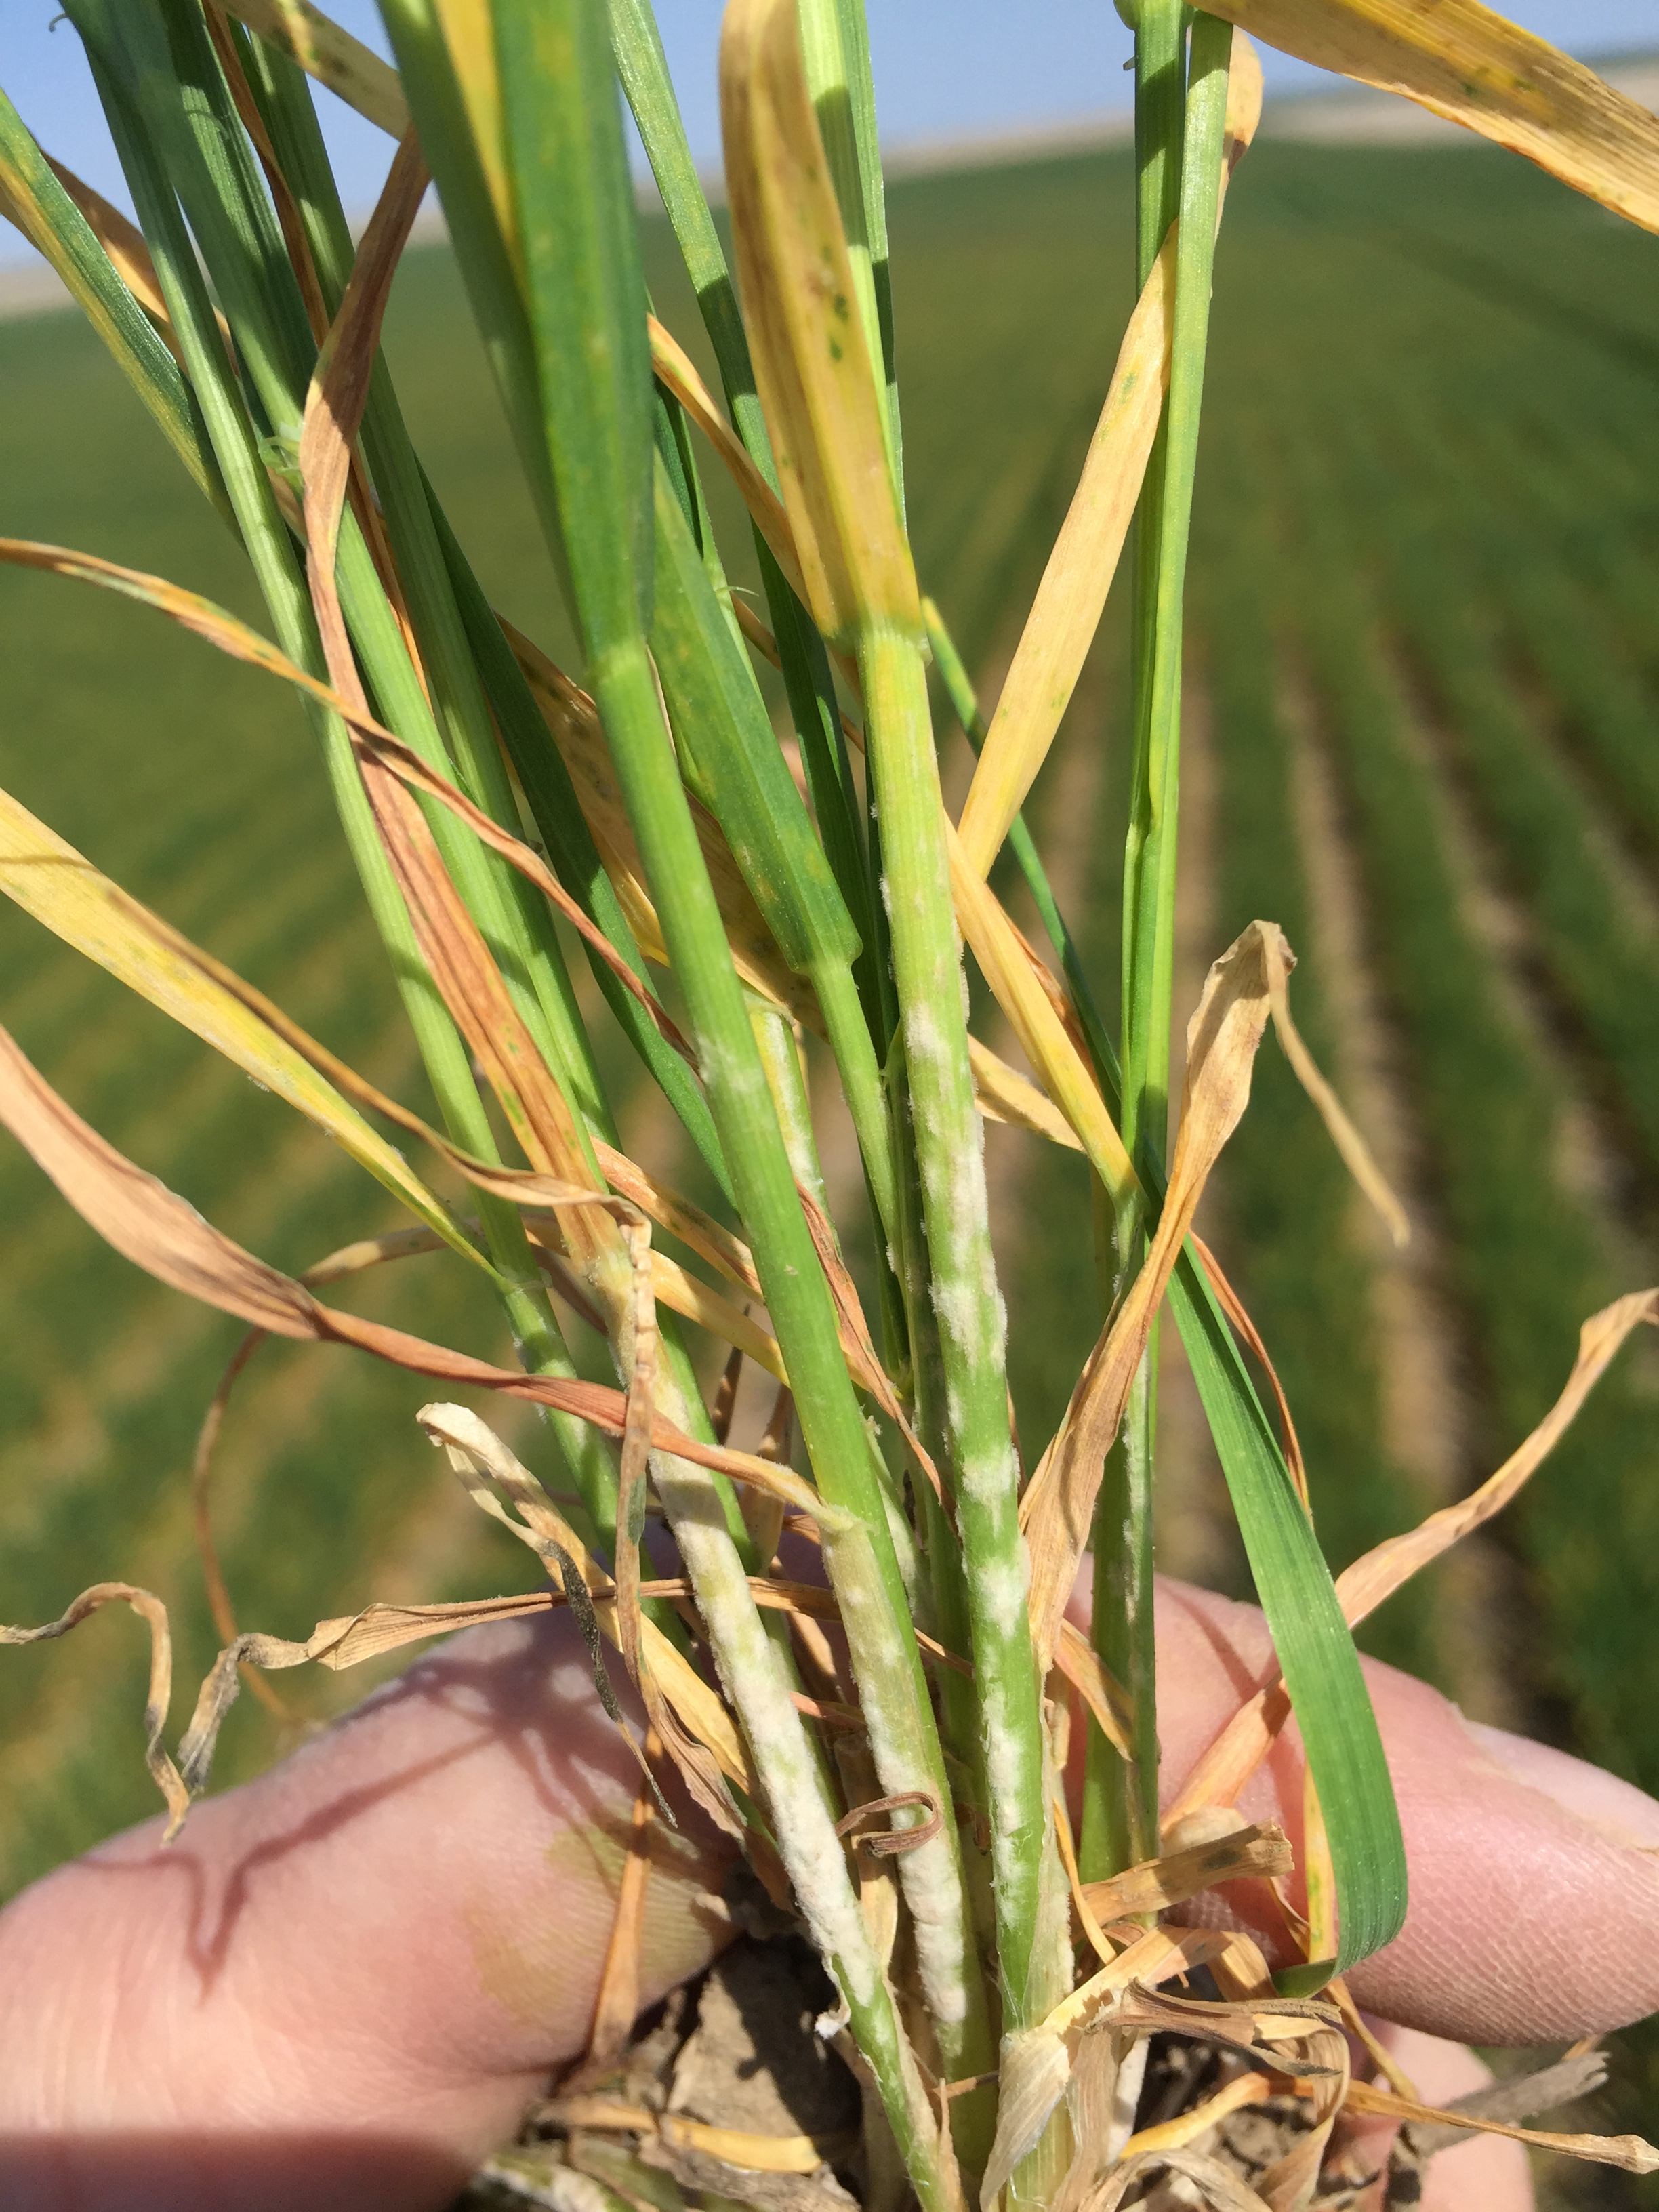 If tillers are severely infected early, heads may not form